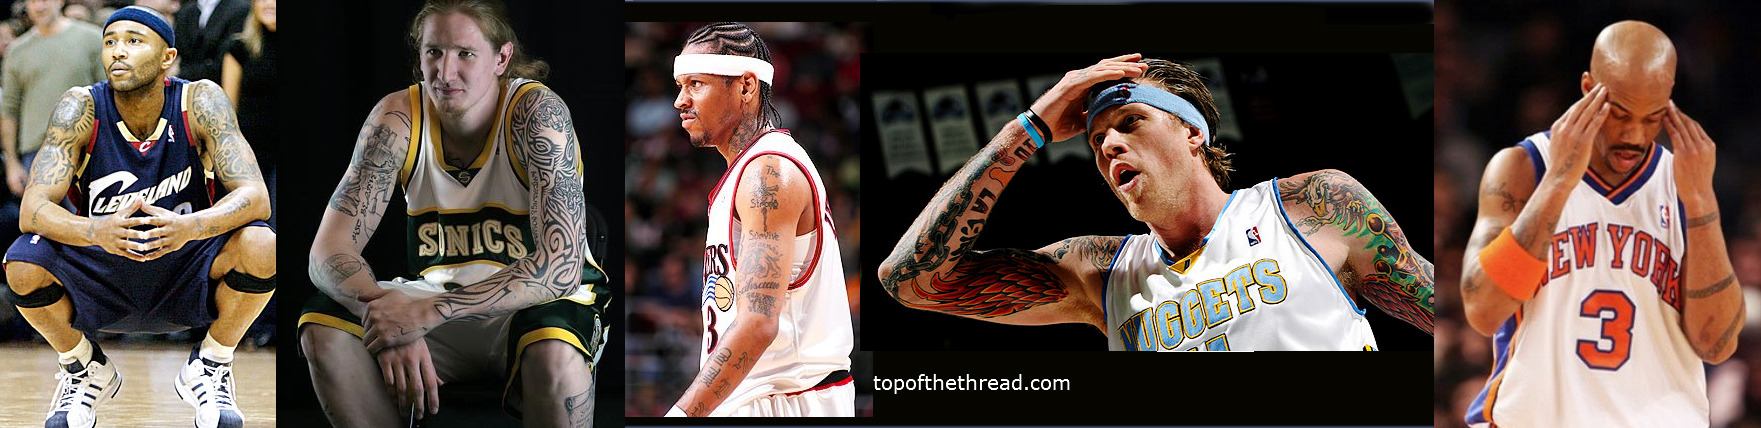 chris anderson tattoos. chris anderson tattoos. Chris Anderson, Denver Nuggets; Chris Anderson, Denver Nuggets. toxotis70. May 4, 02:49 PM. Many users have the same problem,